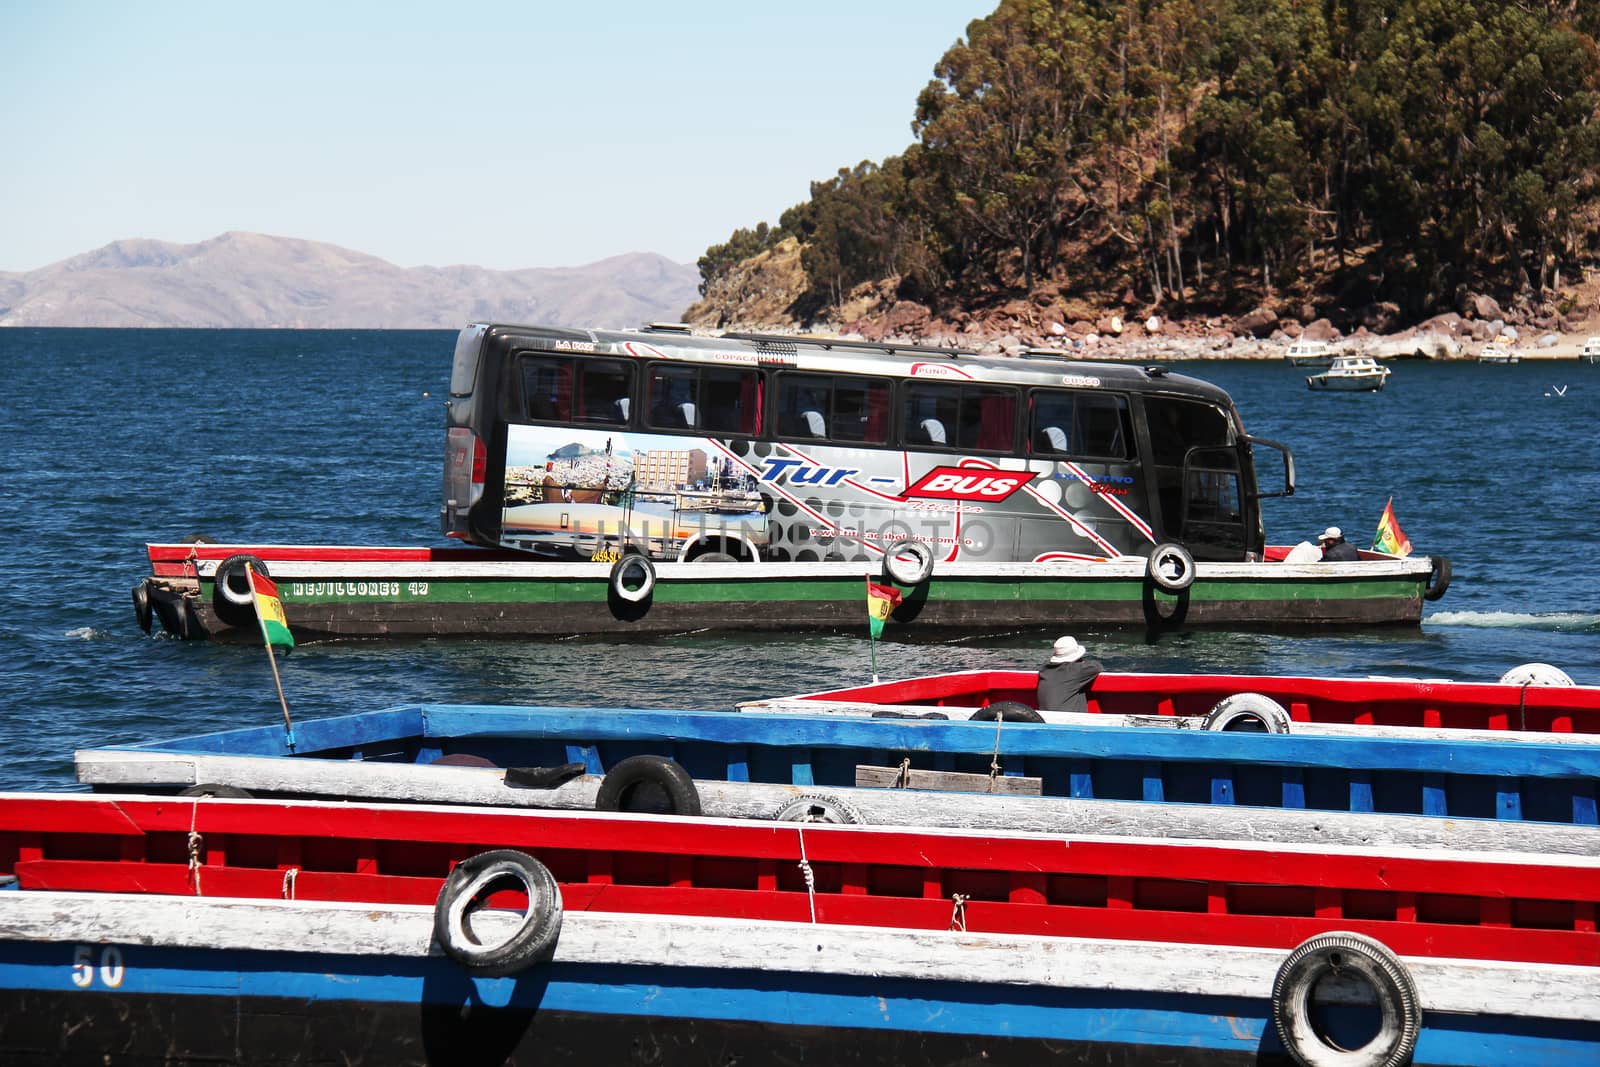 Bus travell in Bolivia by Aarstudio